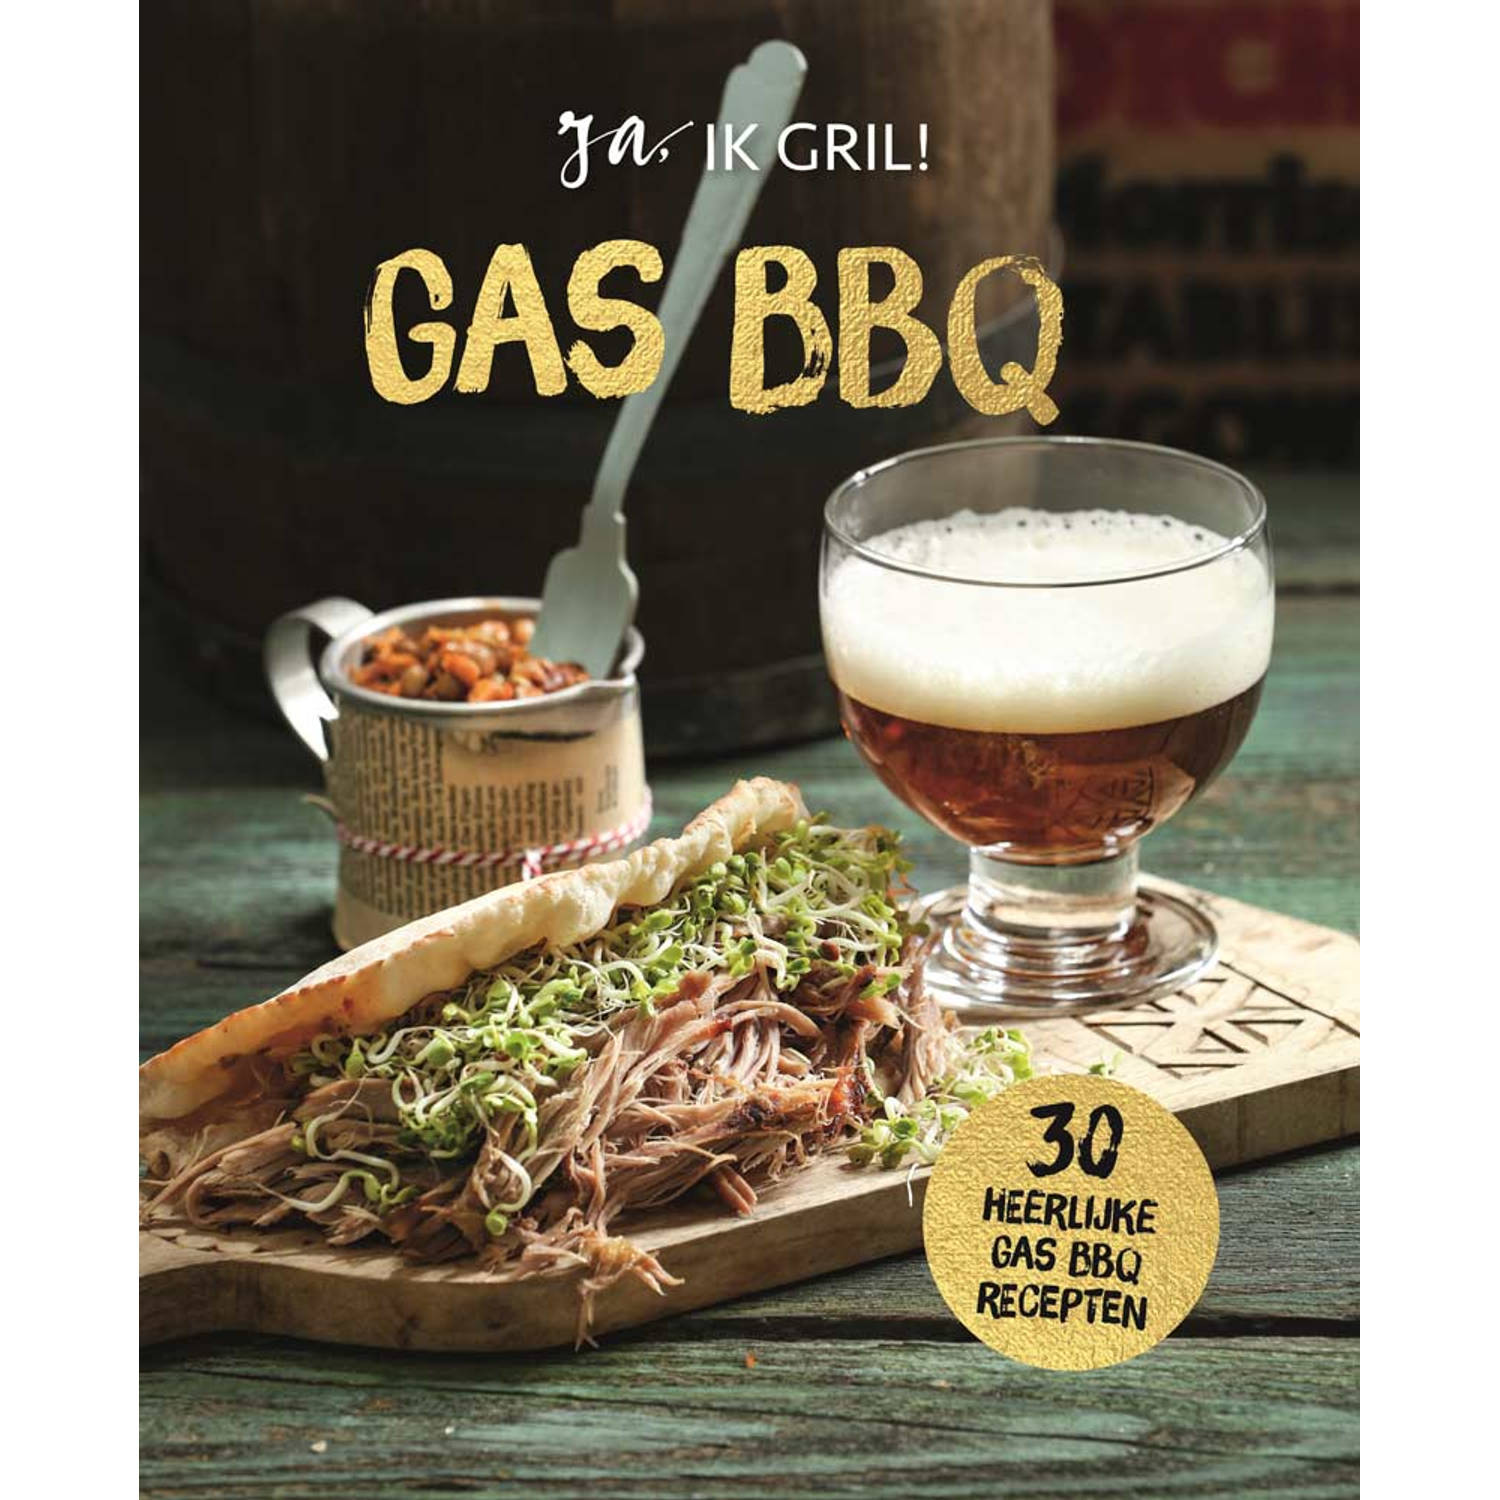 Gas BBQ. Hardcover